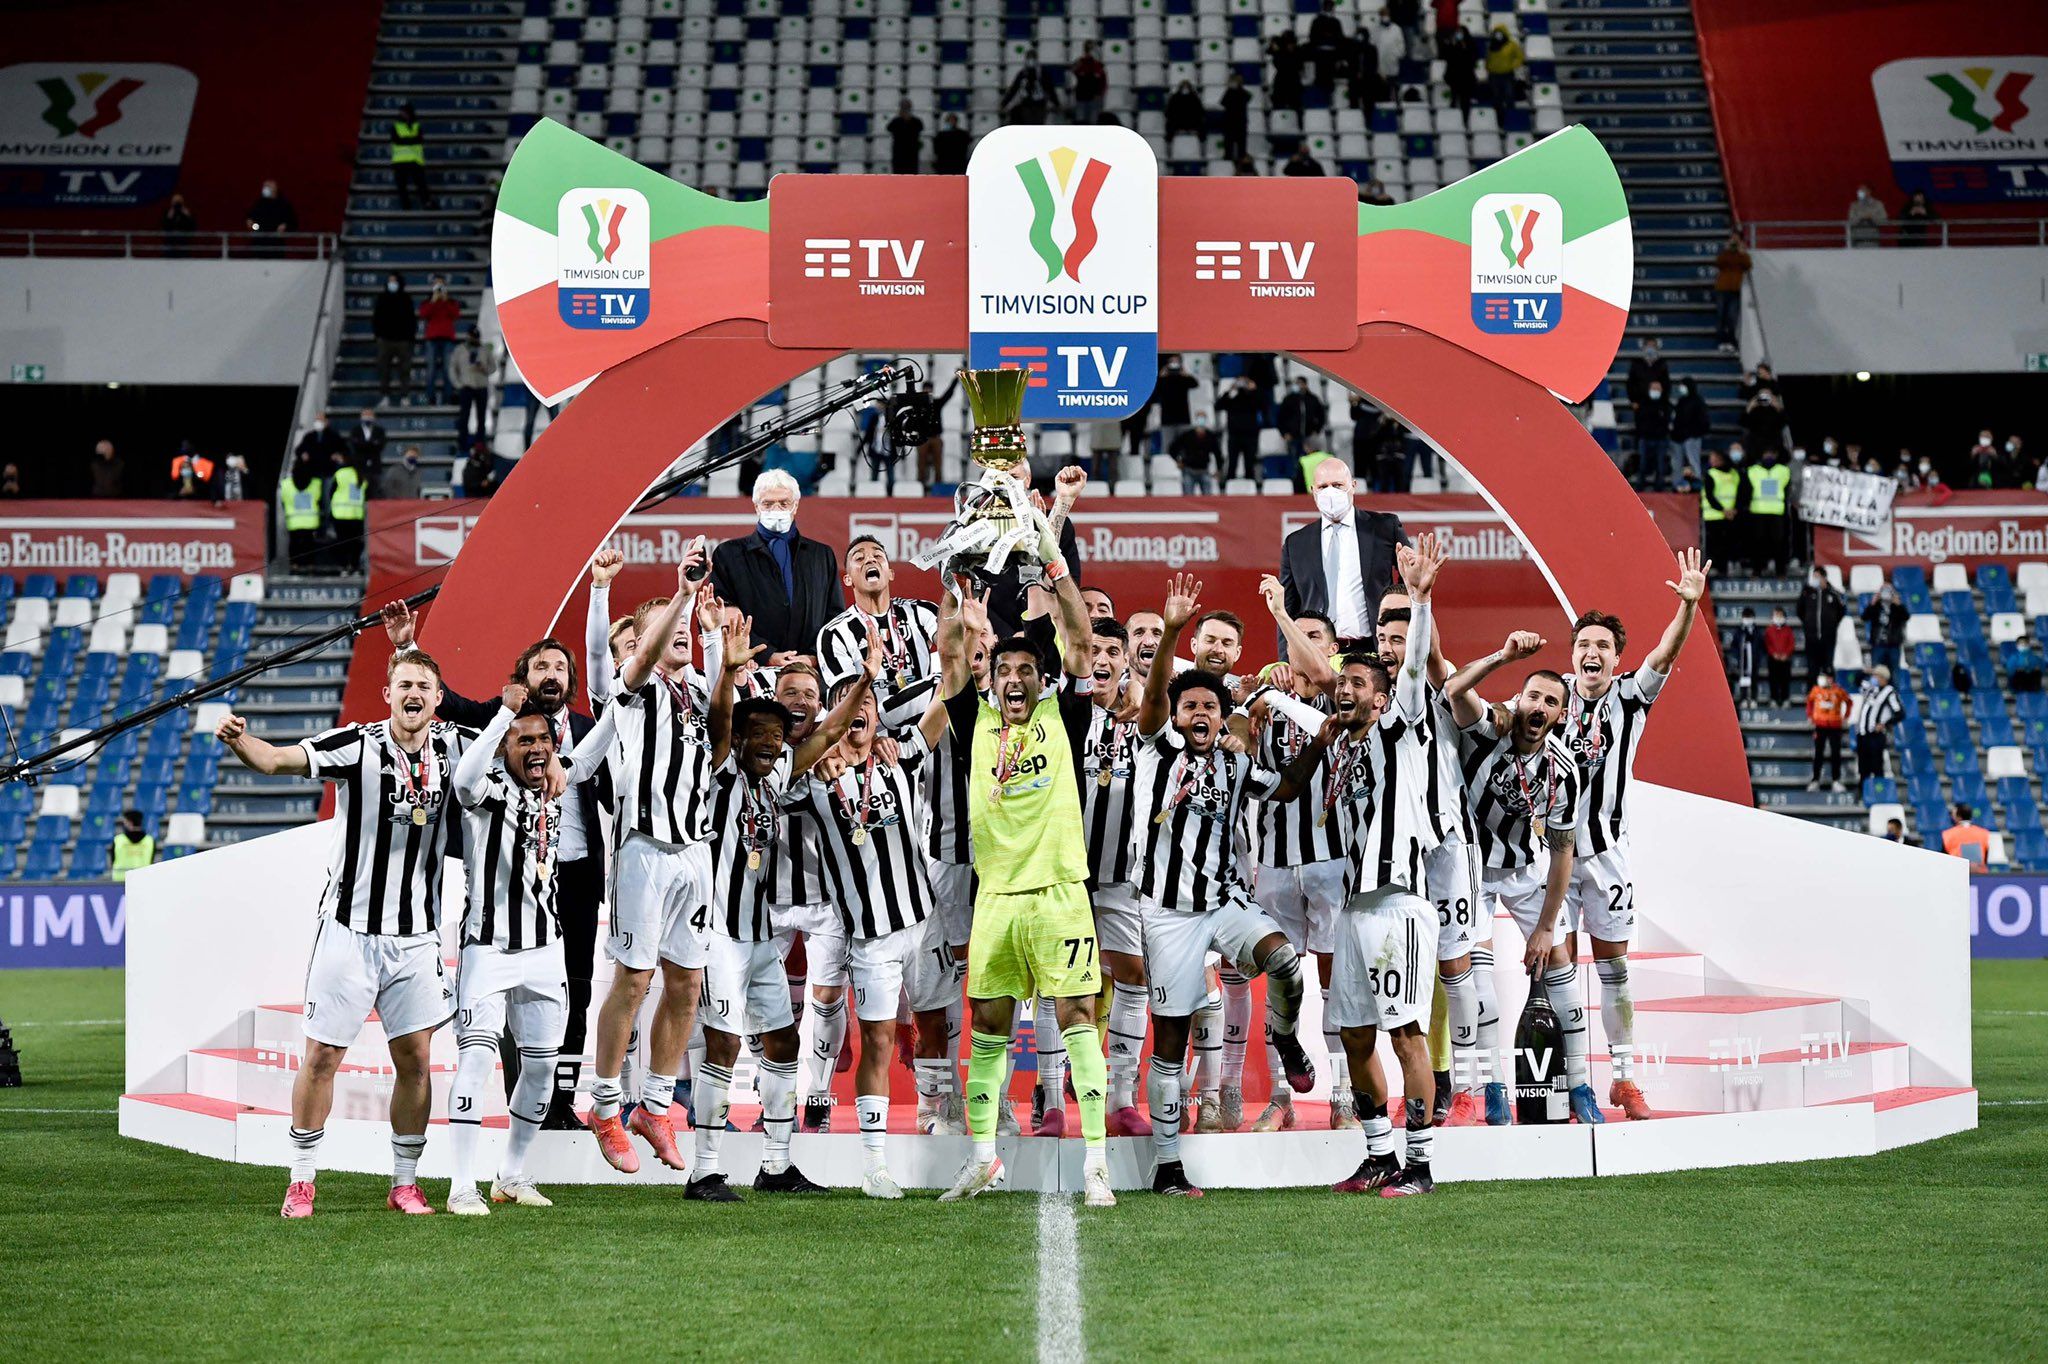 Goals from Kulusevski, Chiesa clinch Juventus’ 14th Italian Cup title